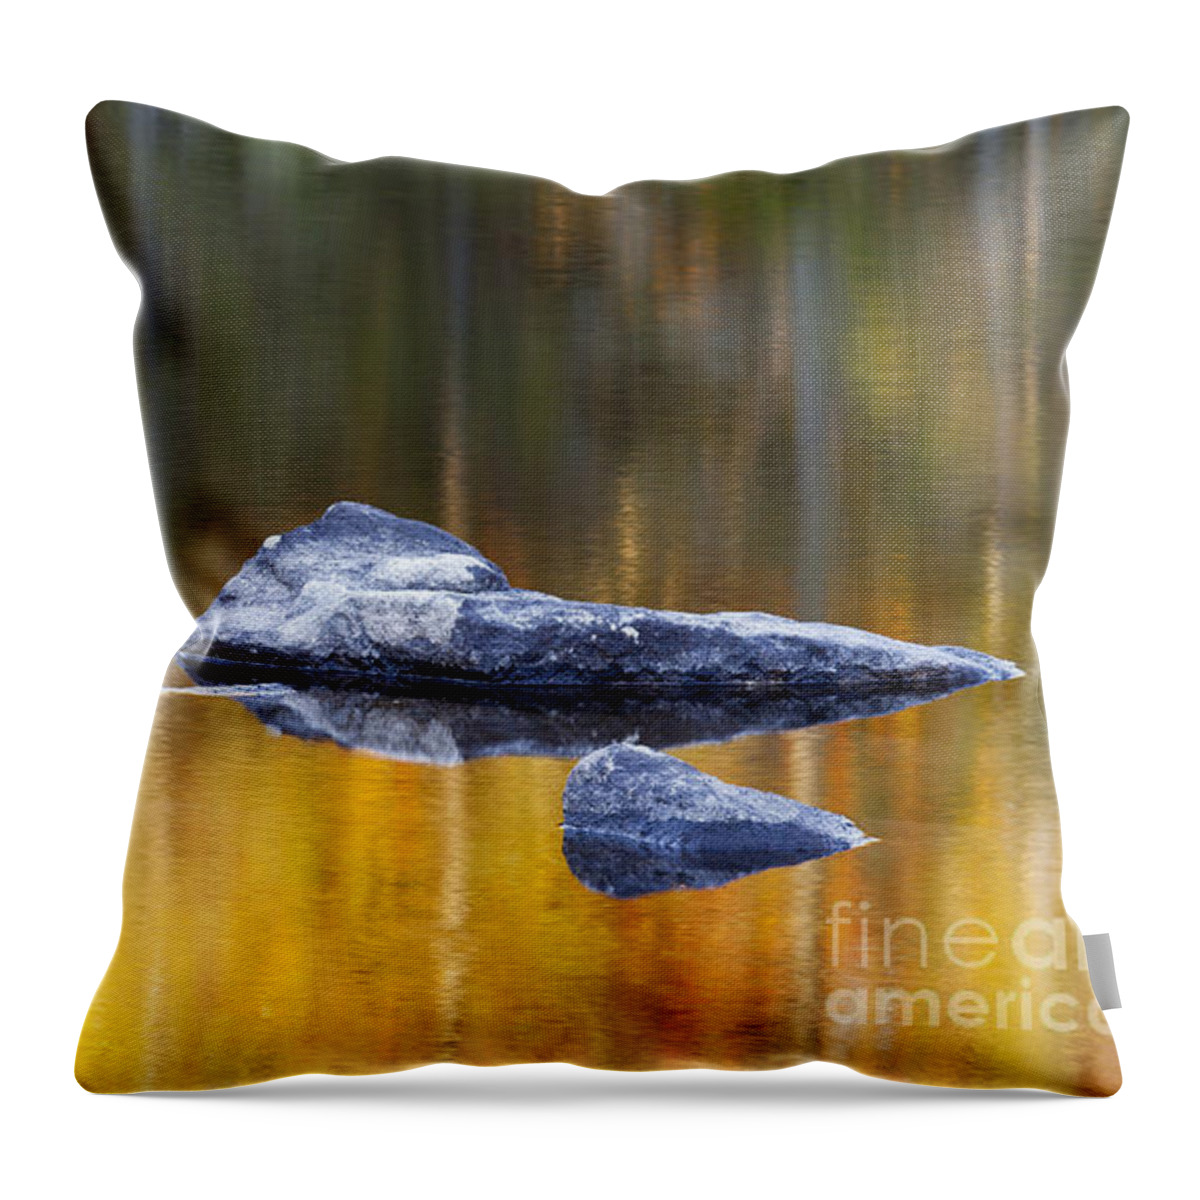 Fall Throw Pillow featuring the photograph Blue Stones by Alan L Graham